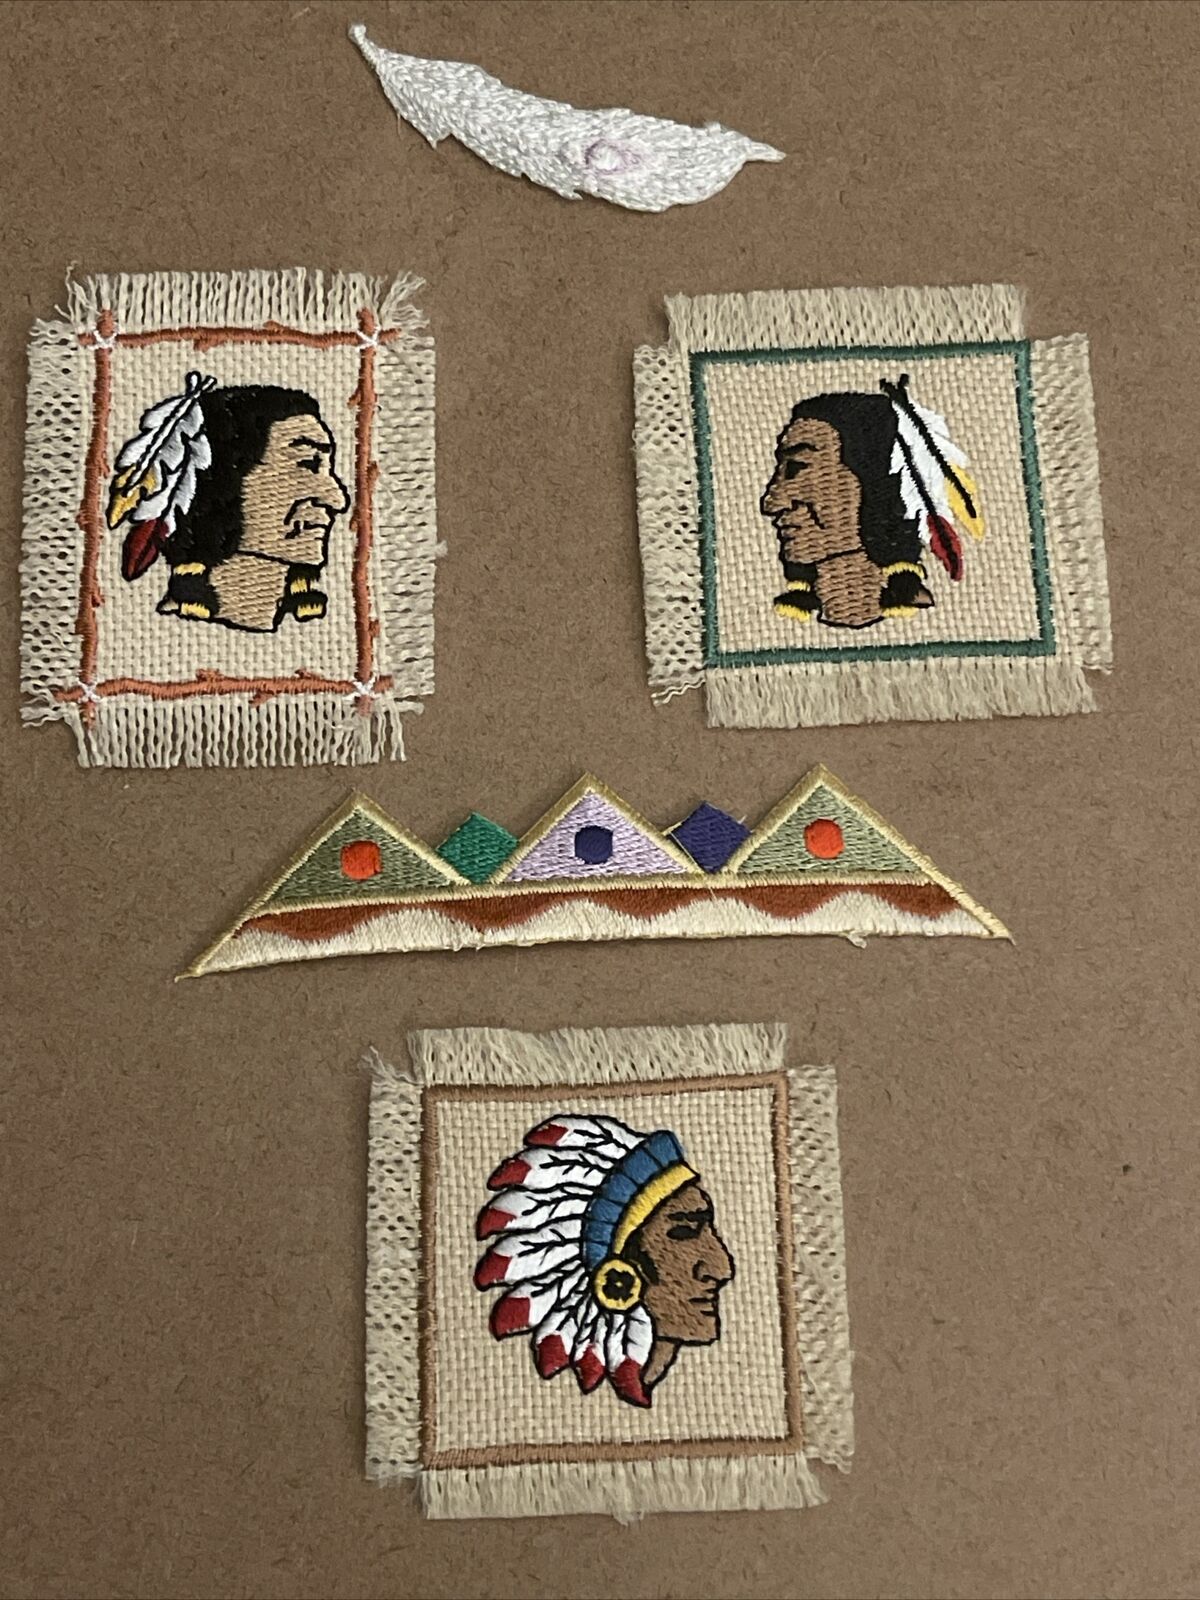 Native American Set Of 5 Patches: New, Iron On, Embroidered, High Quality,